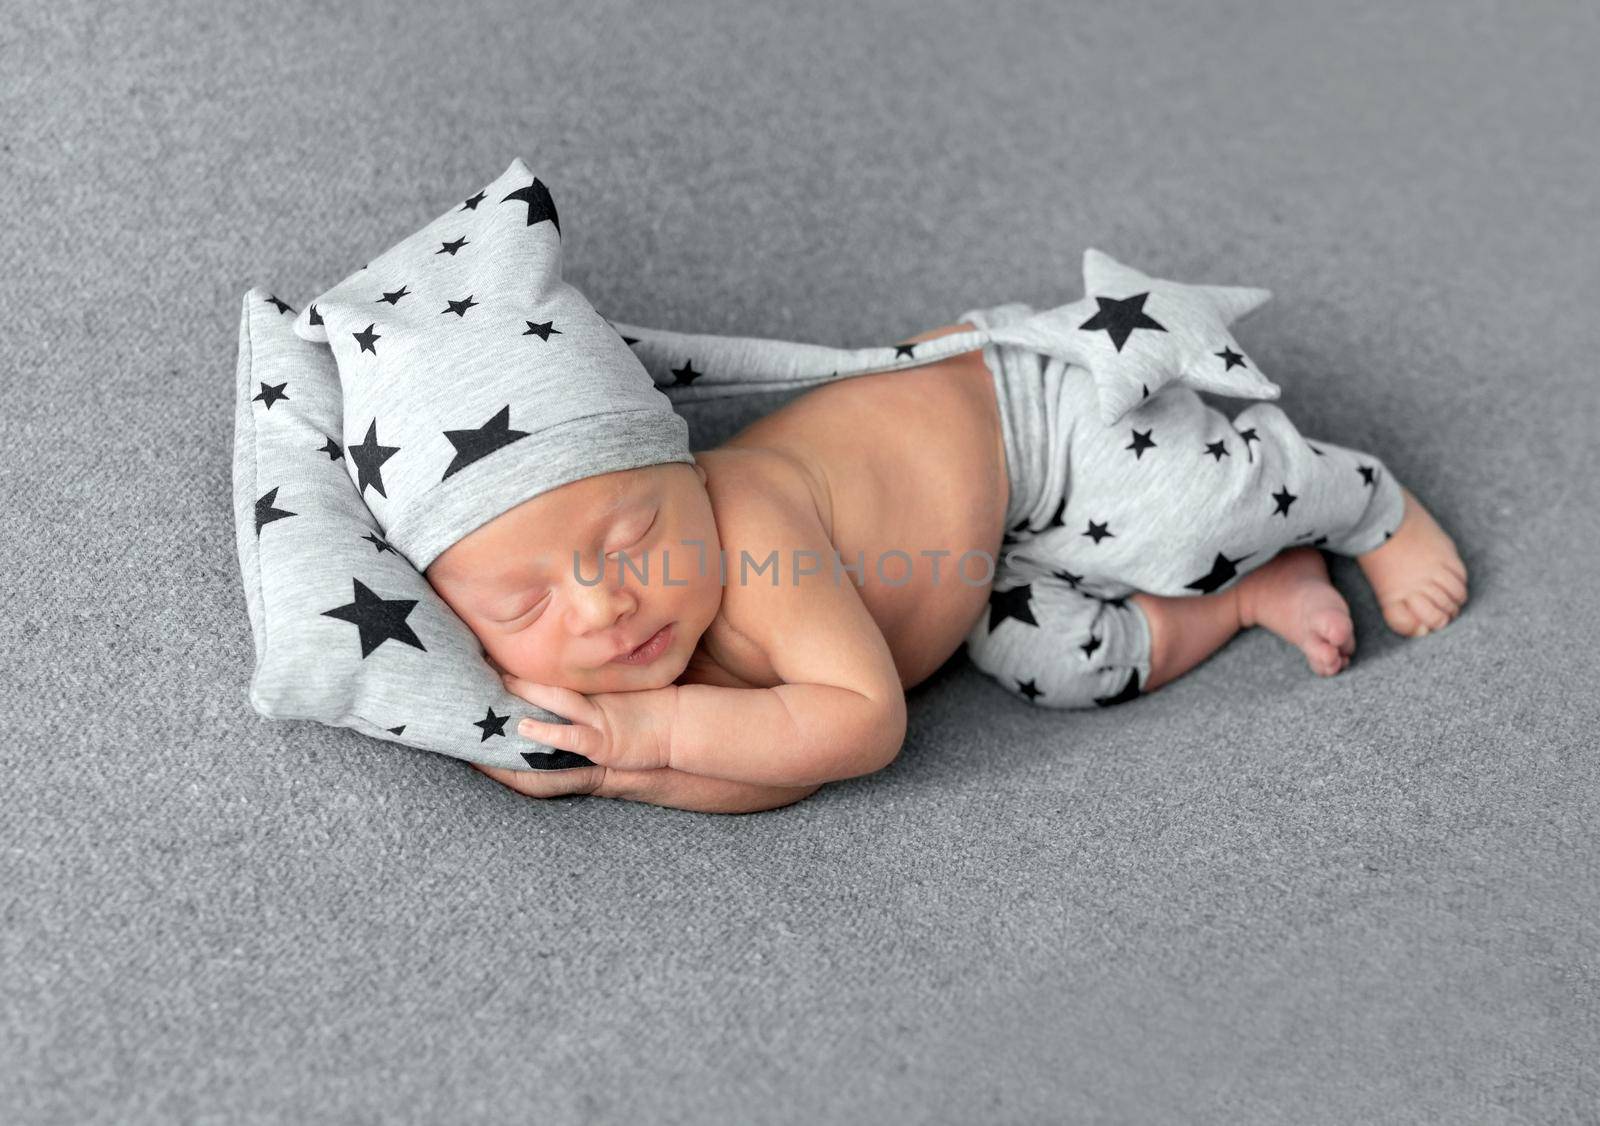 Cute little baby in hat and pants with stars pattern sweetly sleeping on gray blanket